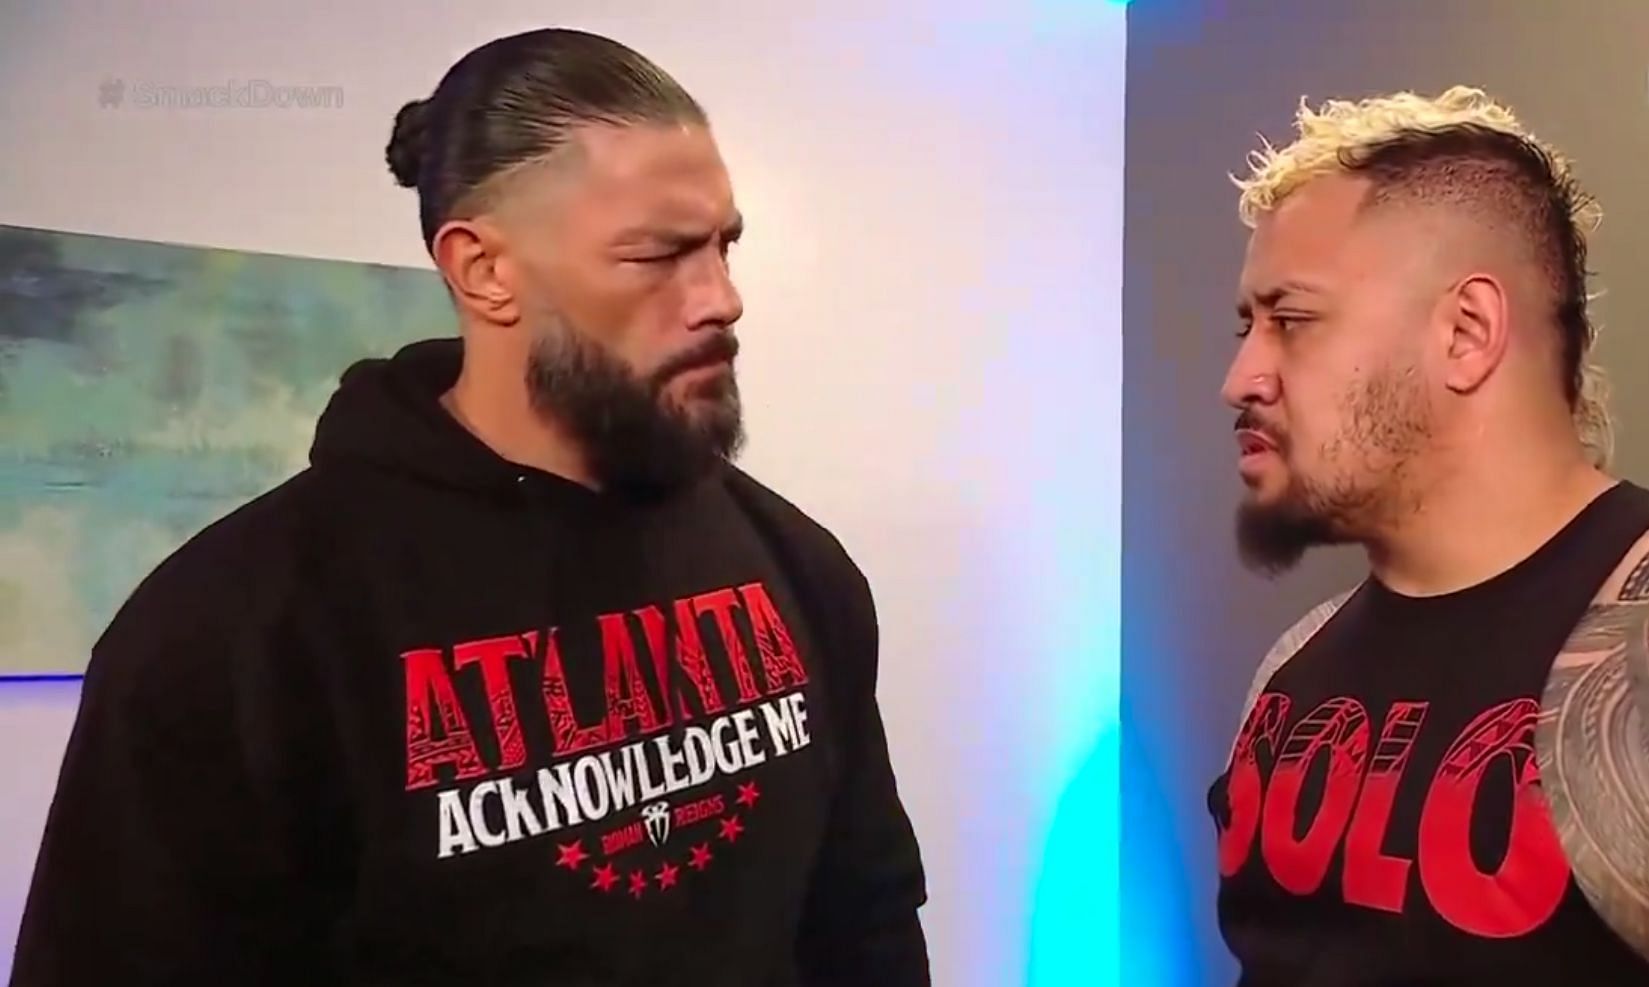 A tense moment and segment backstage on SmackDown